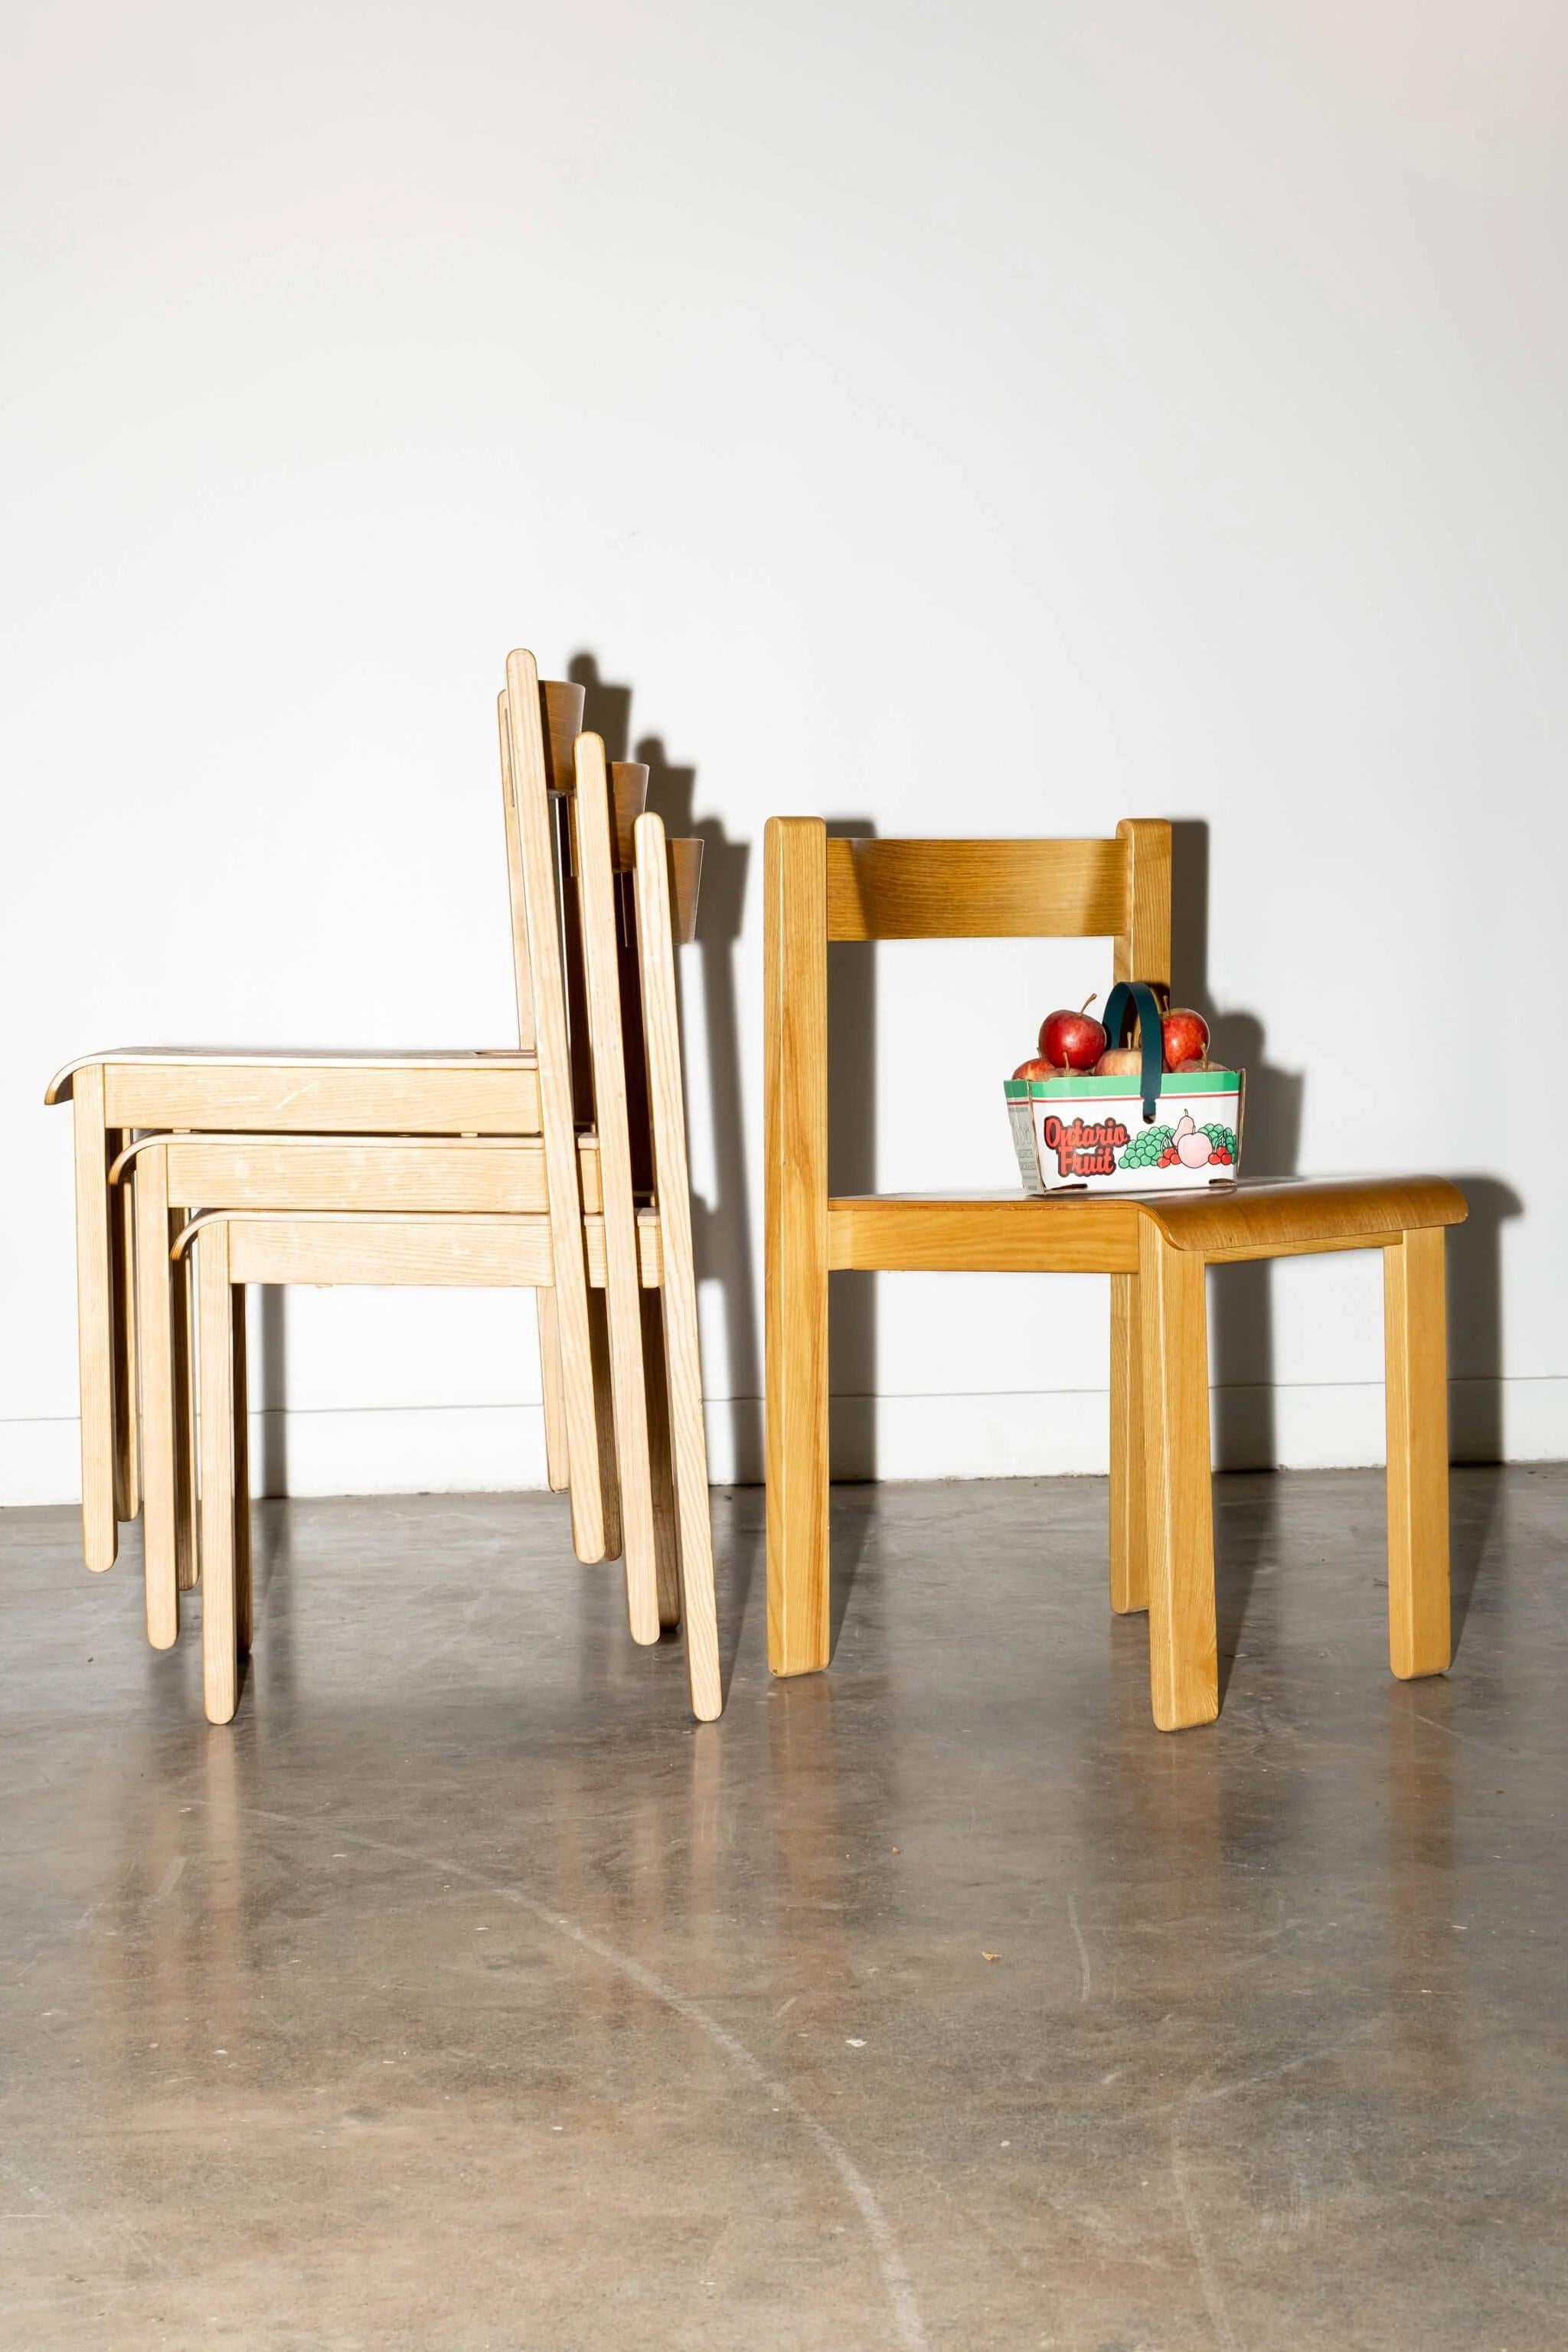 A set of 4 simple, stackable plywood chairs from designer Vico Magistretti. Use as desk and side chairs, or as a dining set. Cool but not too cool for school.